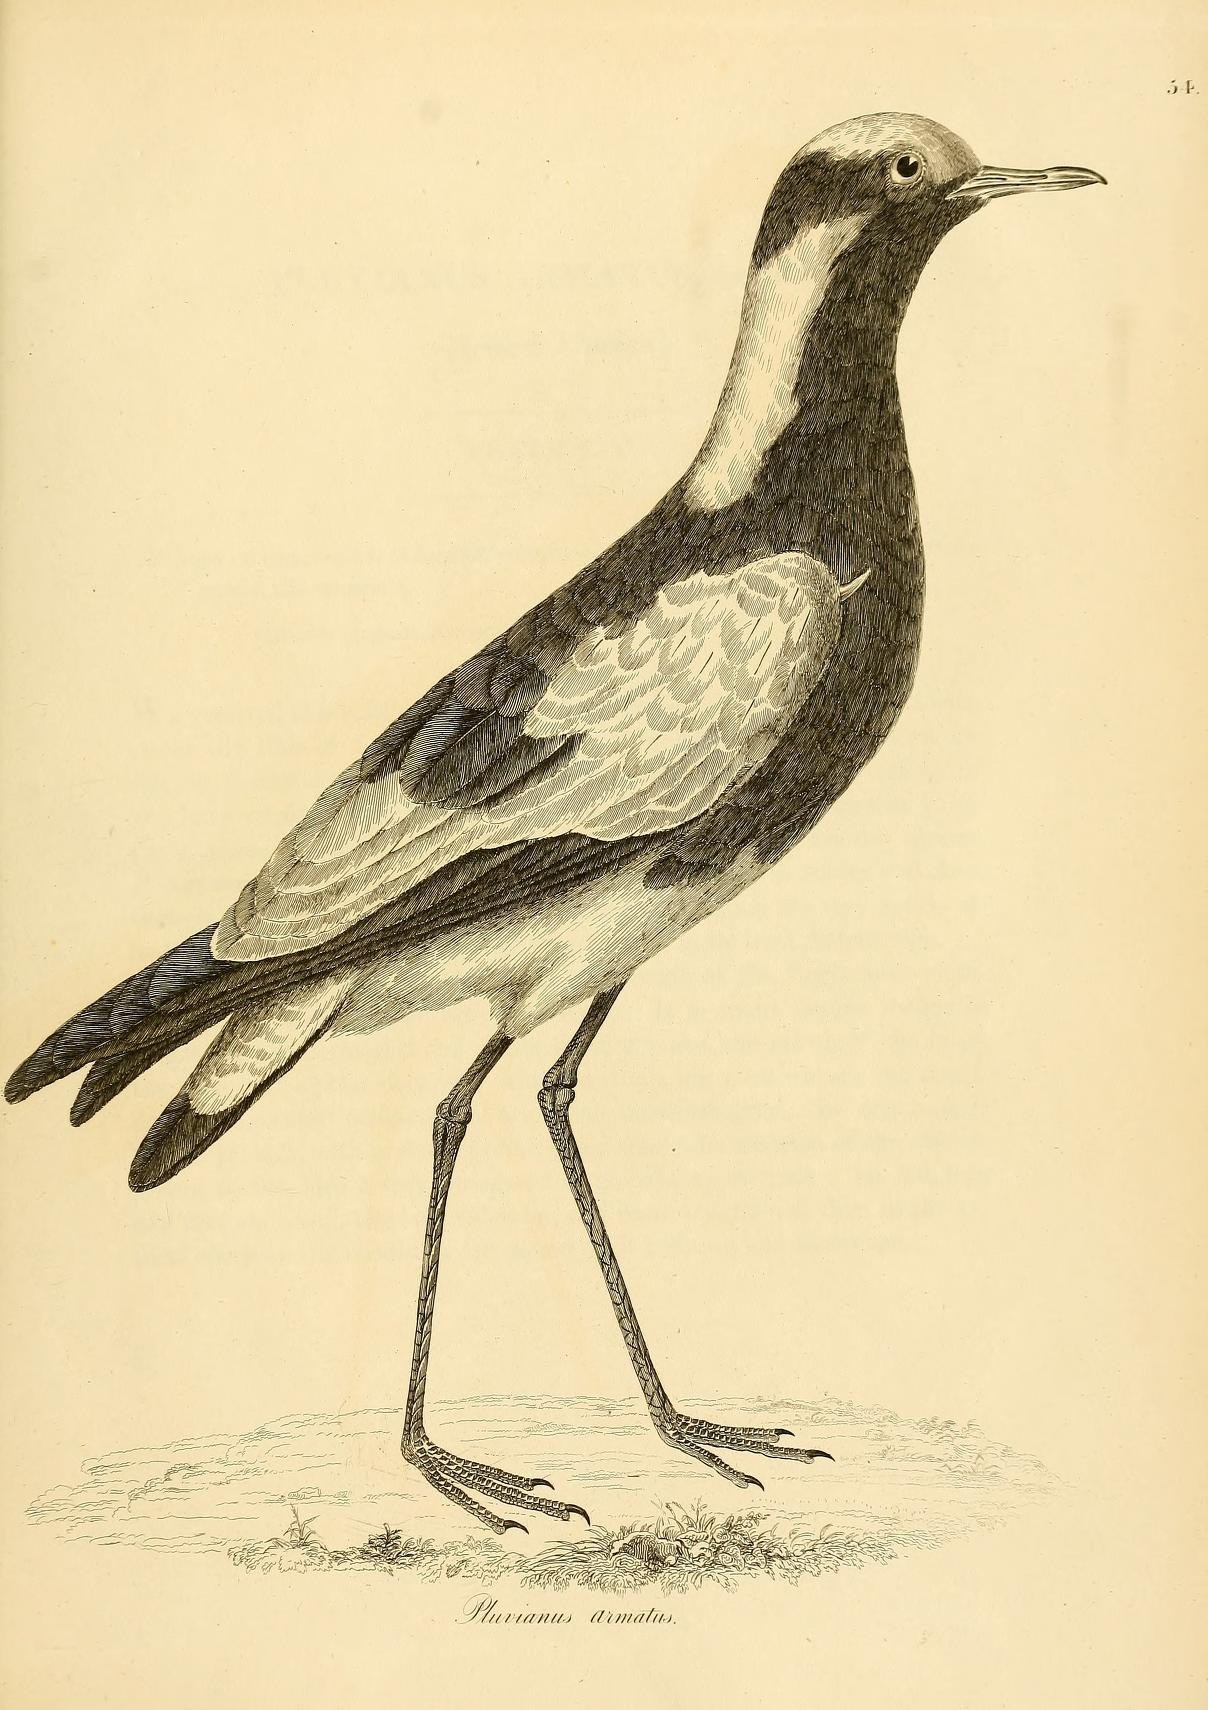 an ink sketch shows the long legs and feet of a small bird